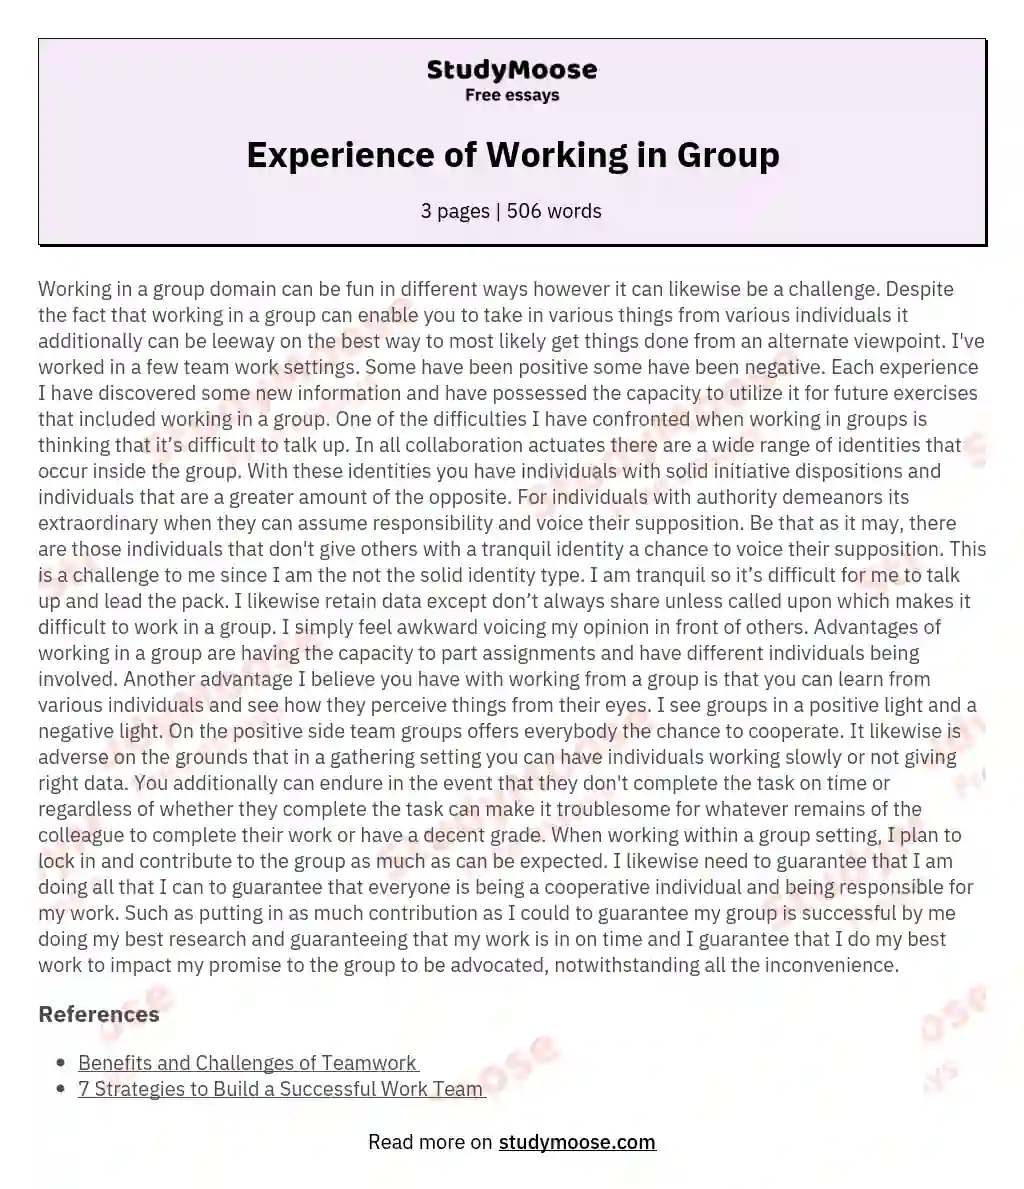 Experience of Working in Group essay